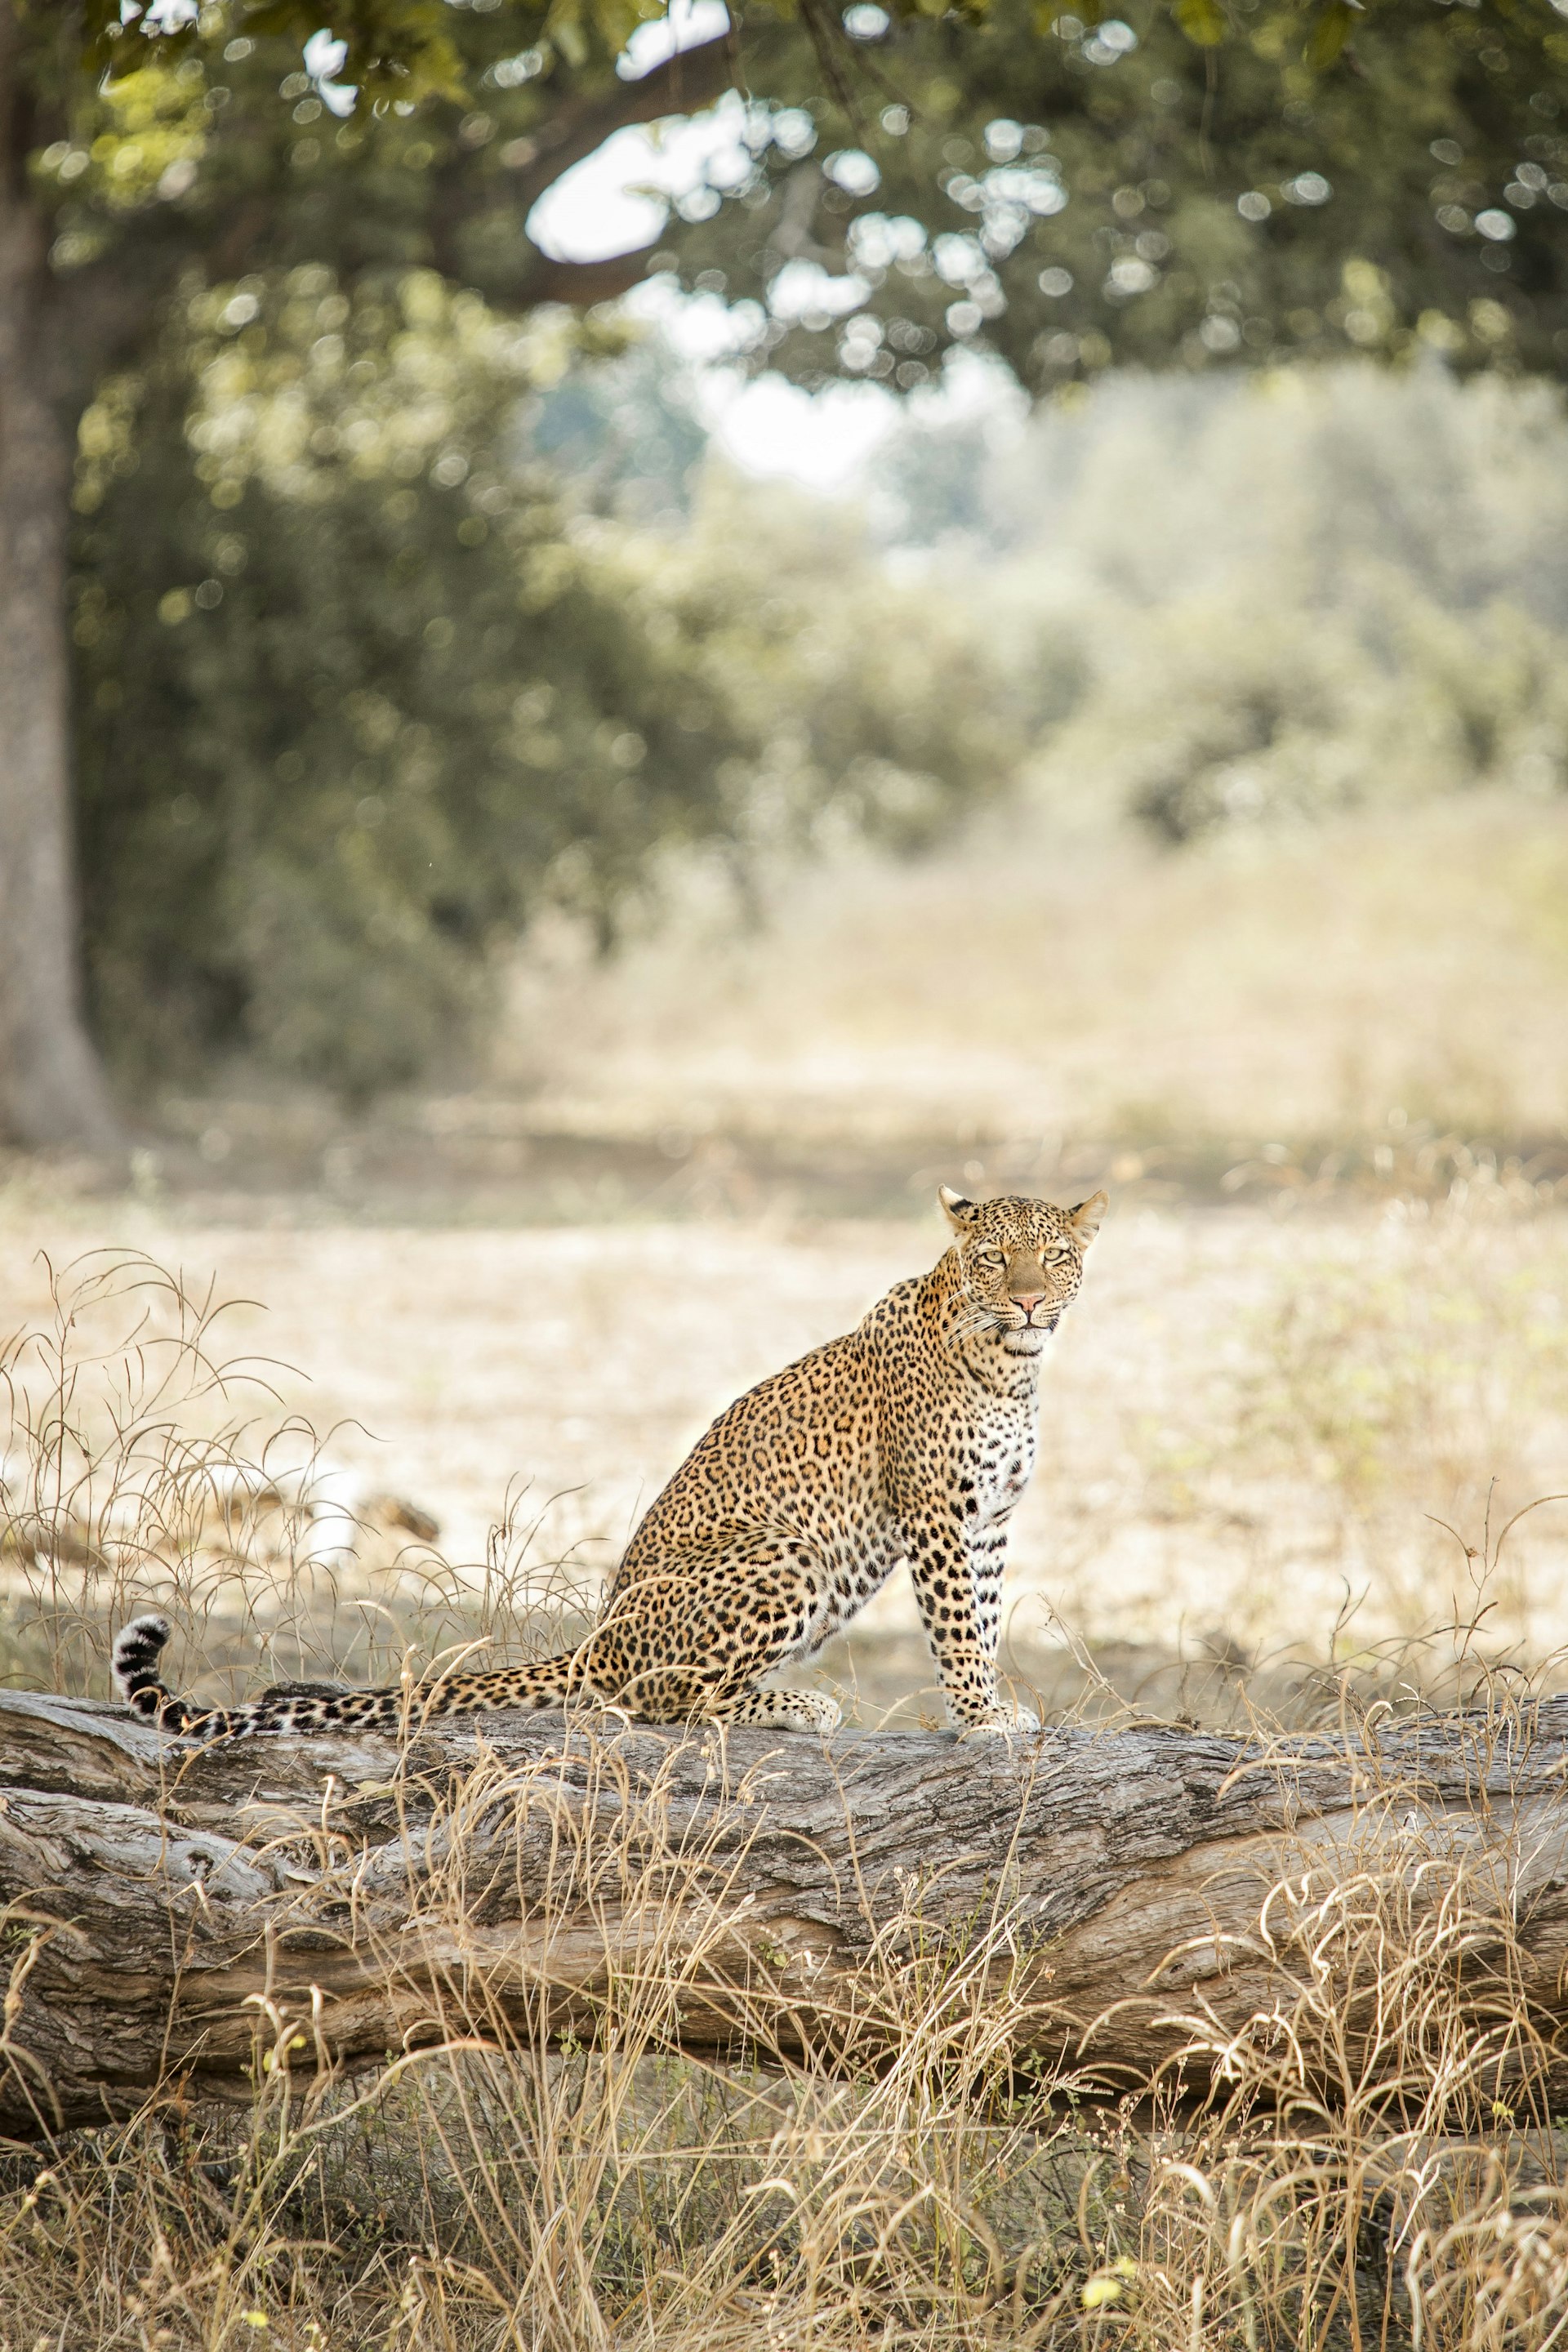 A female leopard sits on a fallen log in the parched undergrowth within South Luangwa National Park; it's head is turned 90 degrees to face the camera.